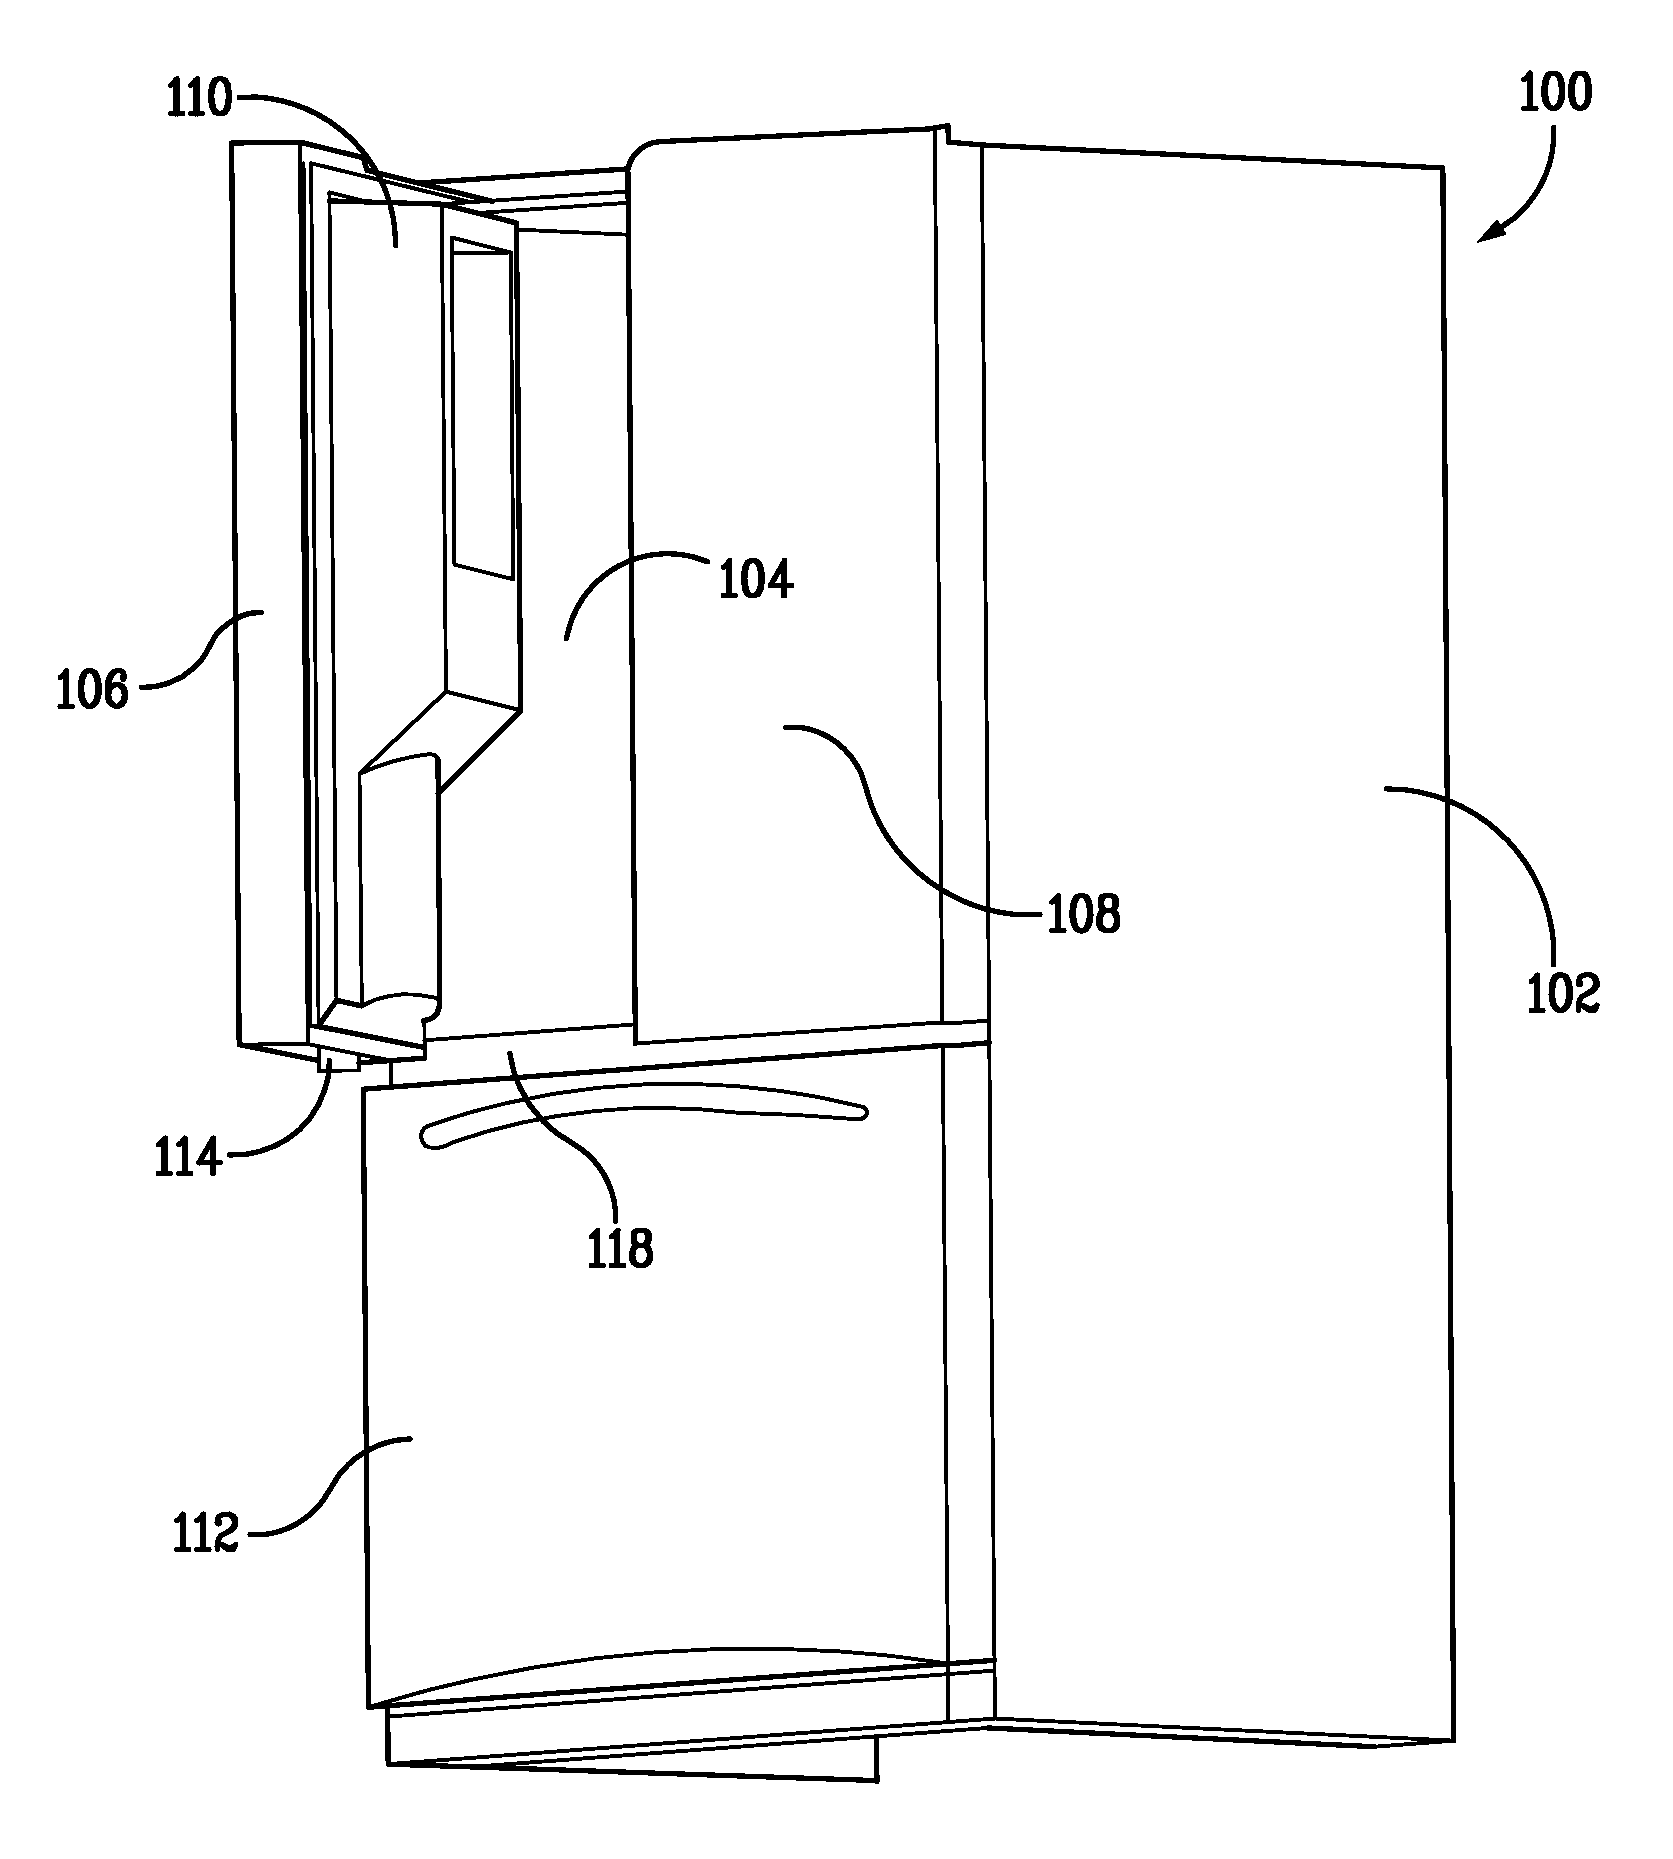 In-door fluid drainage system for a refrigerator